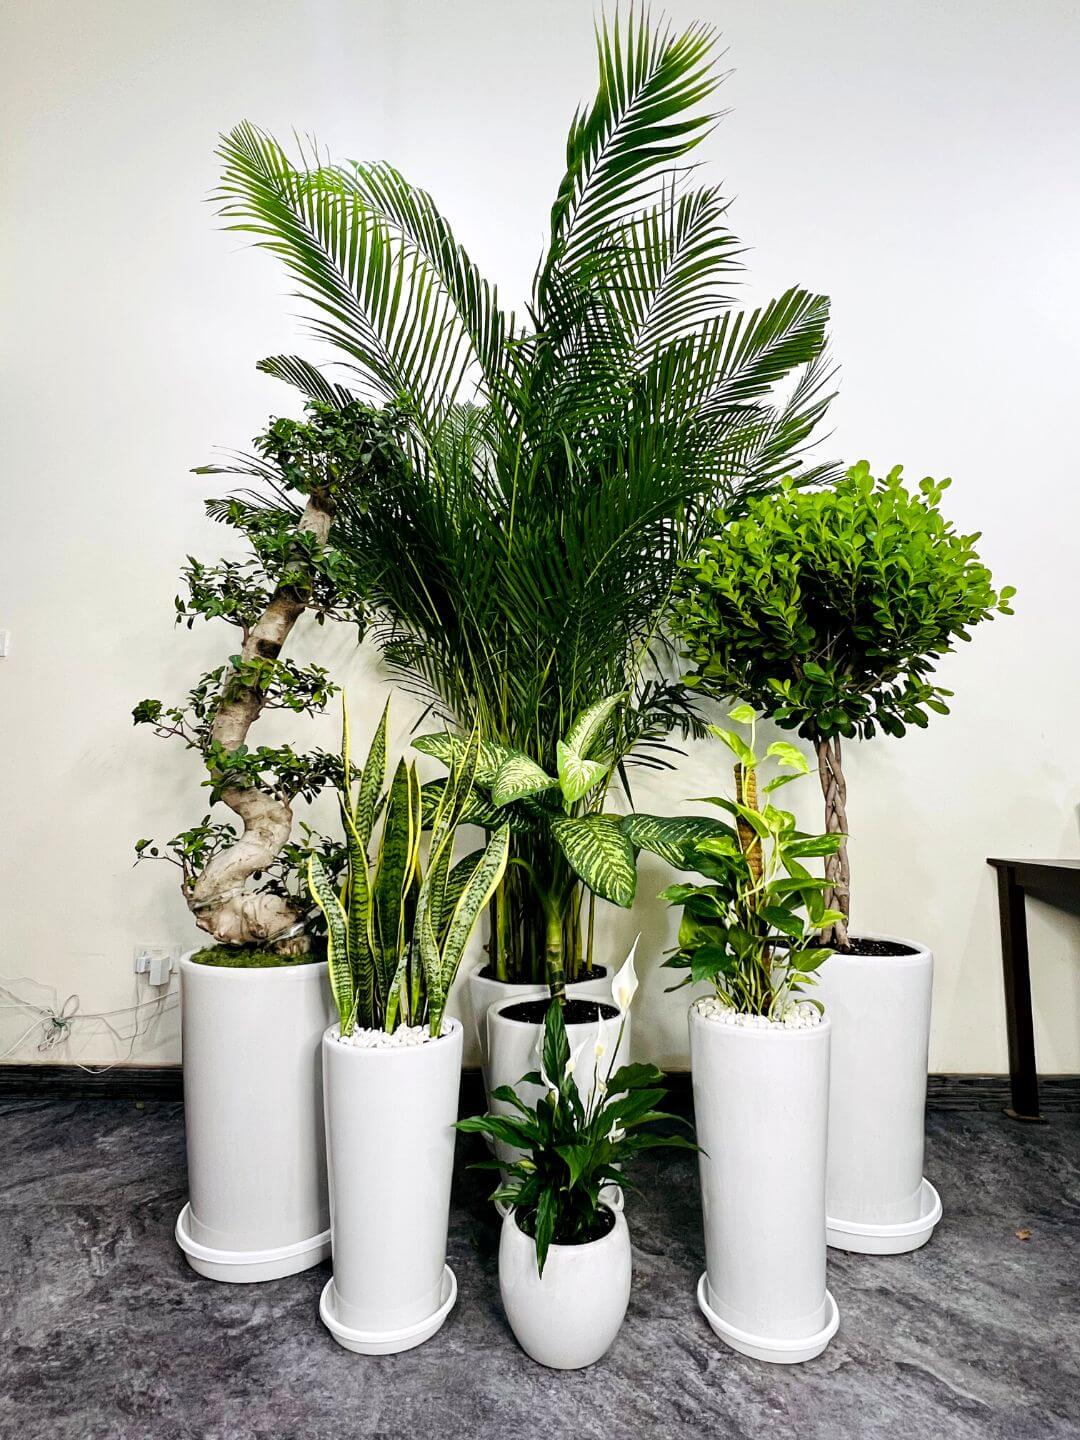 Corporate Office Bundle of 9 Potted Plants | Mixed Light Planted in White Ceramic Pot